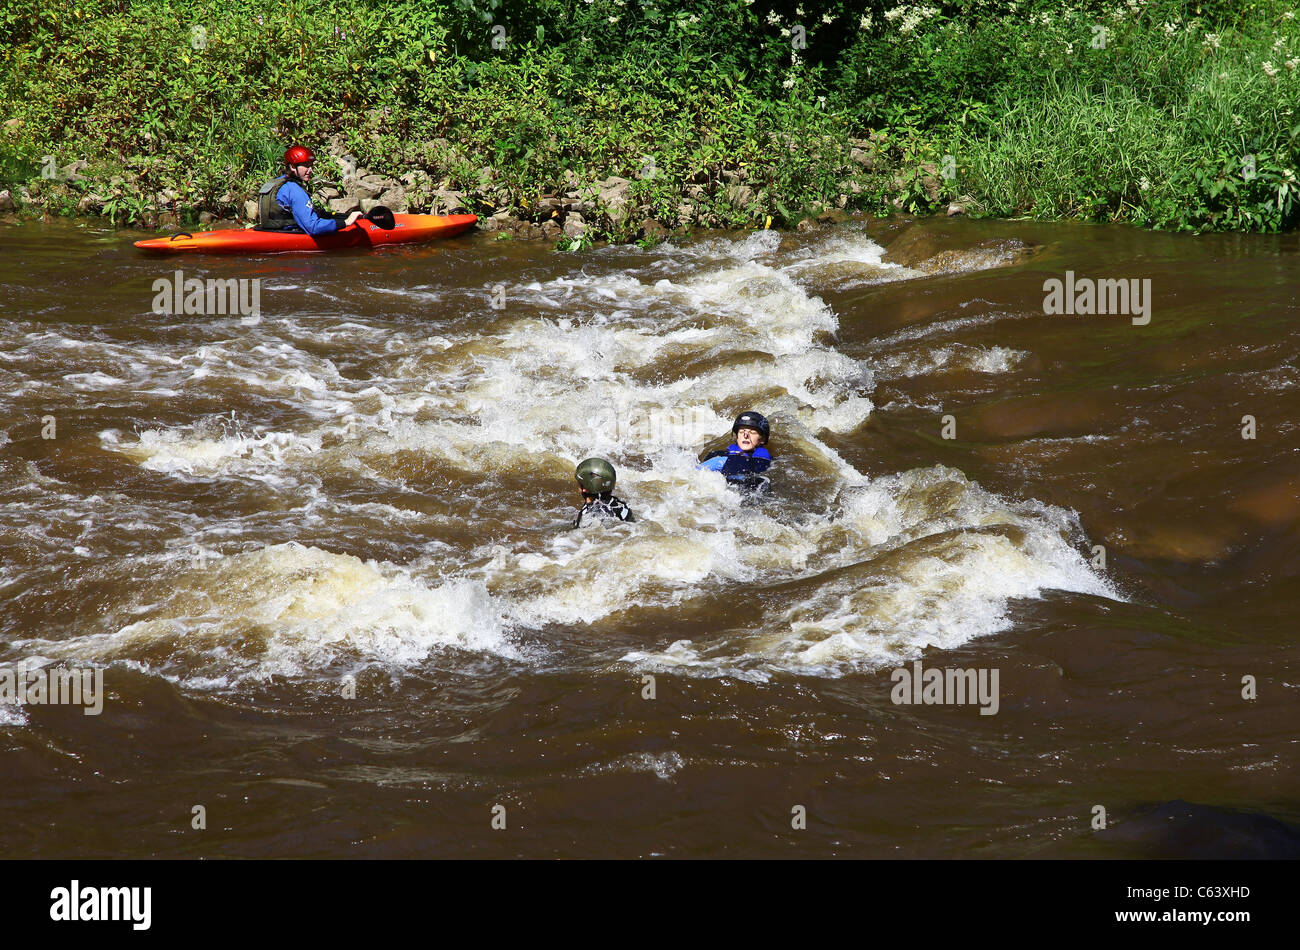 Extreme sports enthusiasts shooting the rapids in the River Wye, Symonds Yat, Herefordshire, England, UK Stock Photo